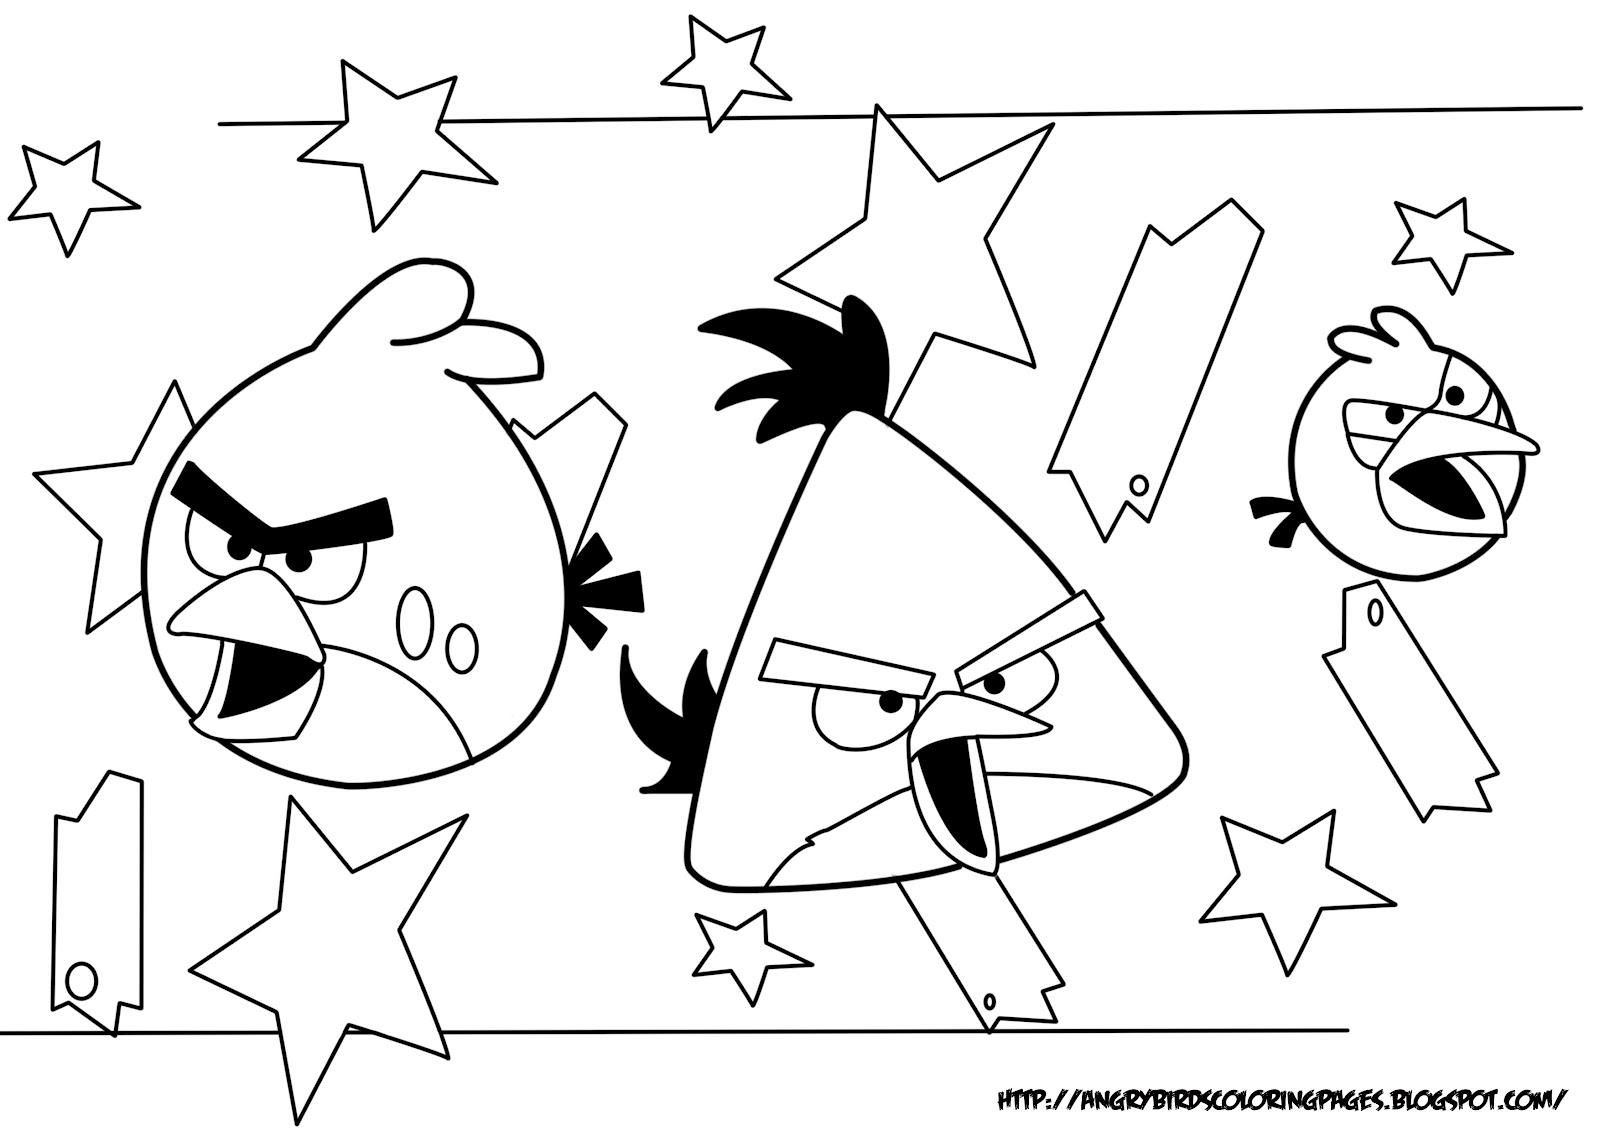 Exceptional Angry Birds Coloring Pages Pdf #8 - Angry Birds ...